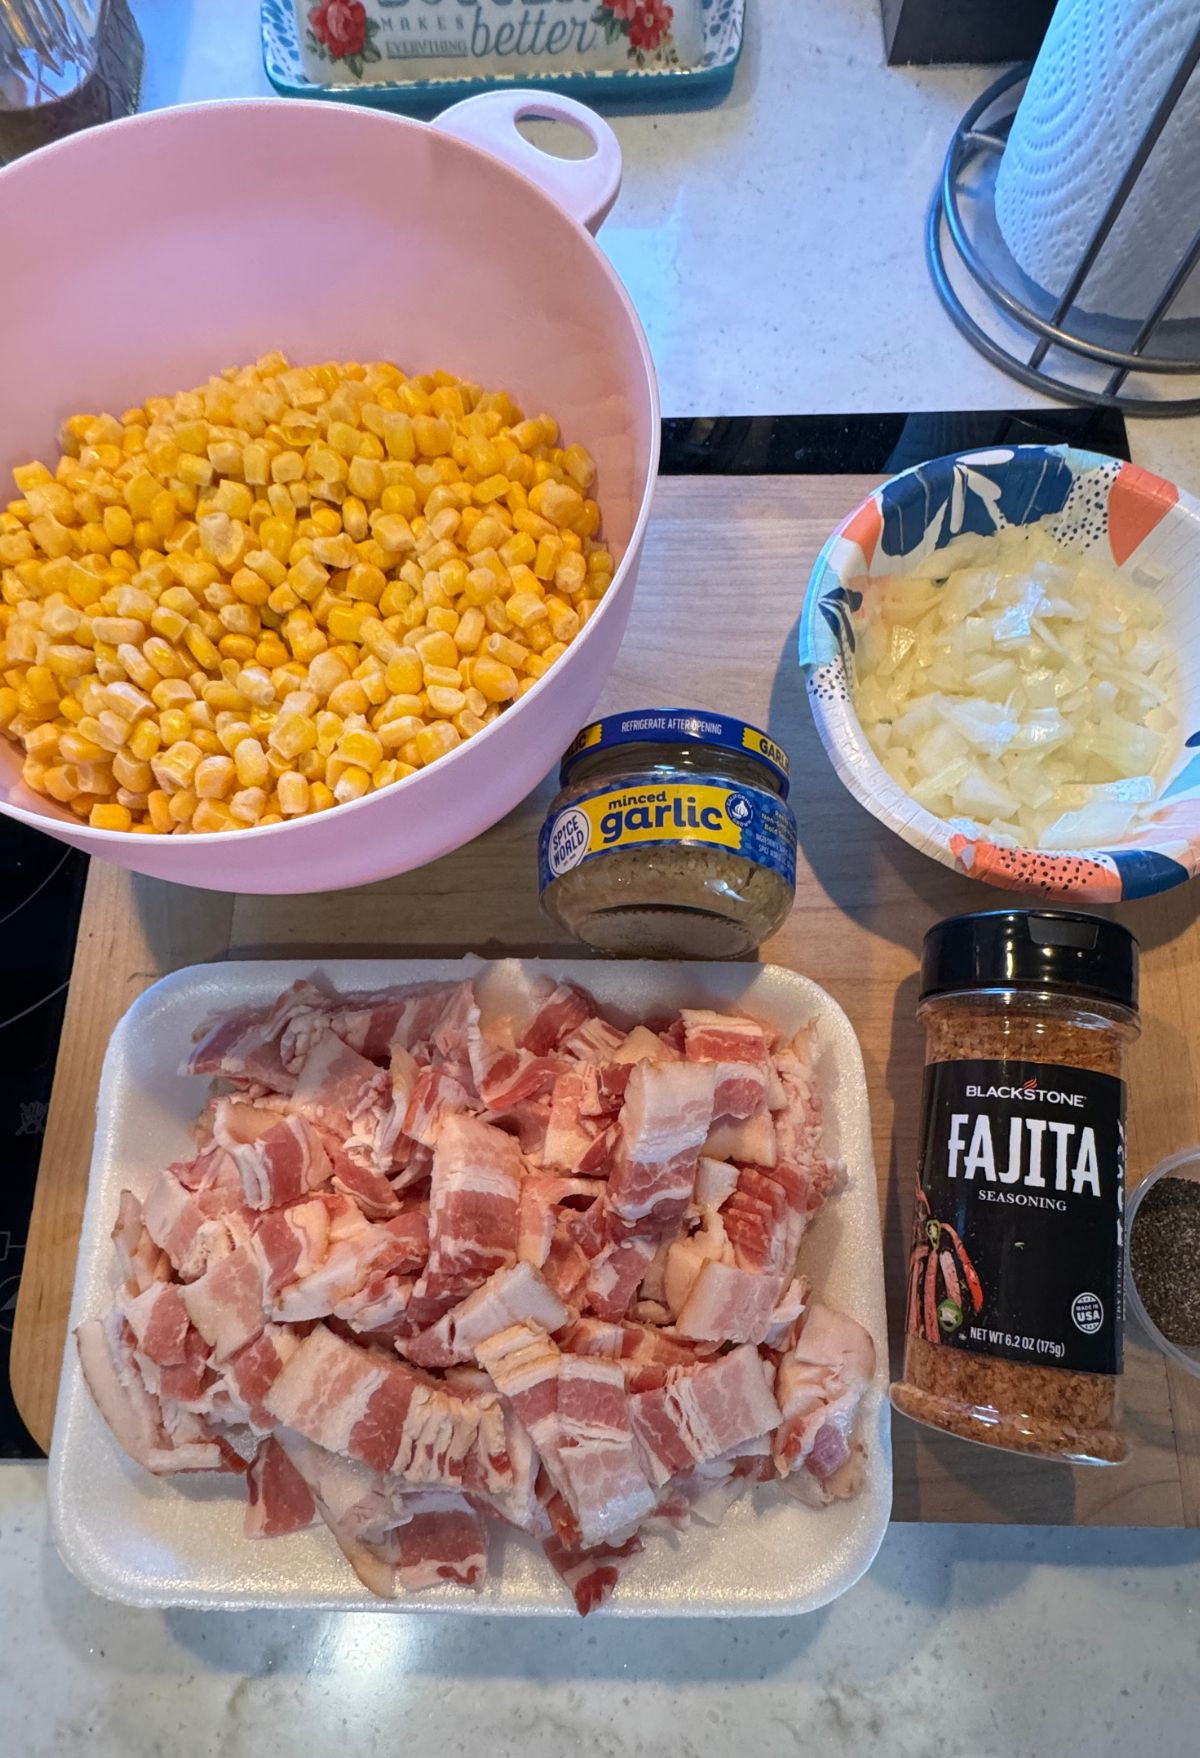 Ingredients for a meal preparation including diced bacon, corn, chopped onions, minced garlic, and fajita seasoning on a kitchen counter.